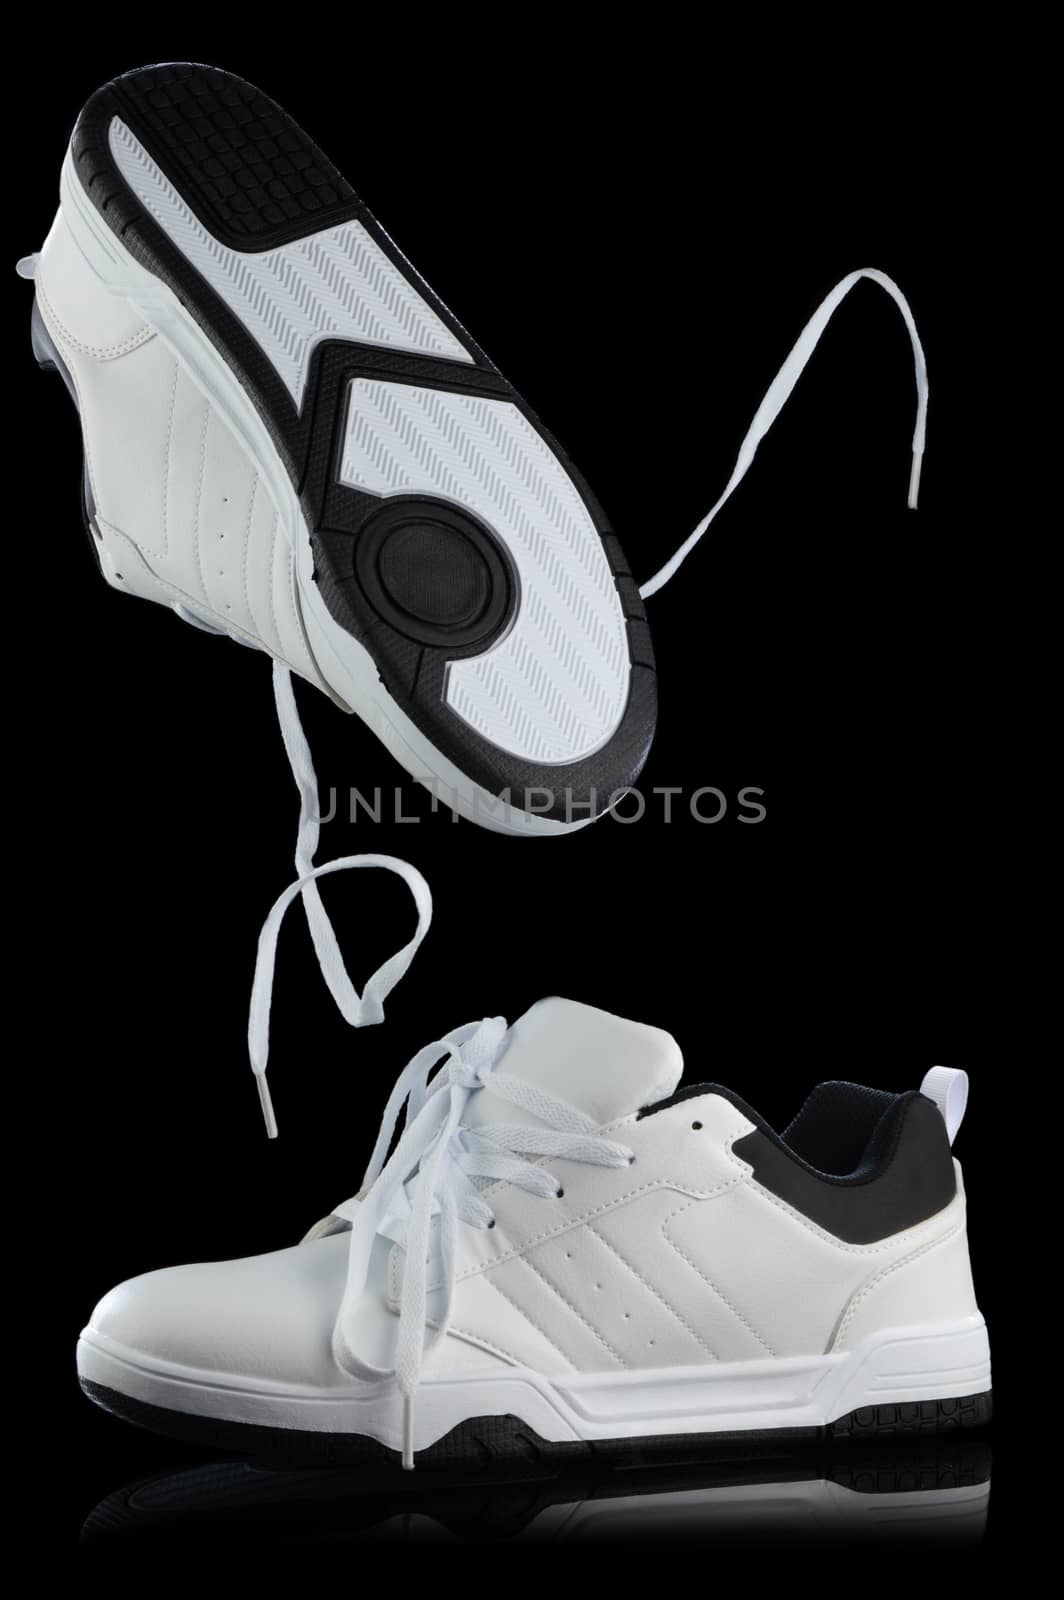 A stylish pair of mens white shoes captured over a black background making use of studio secrets to get the composition.